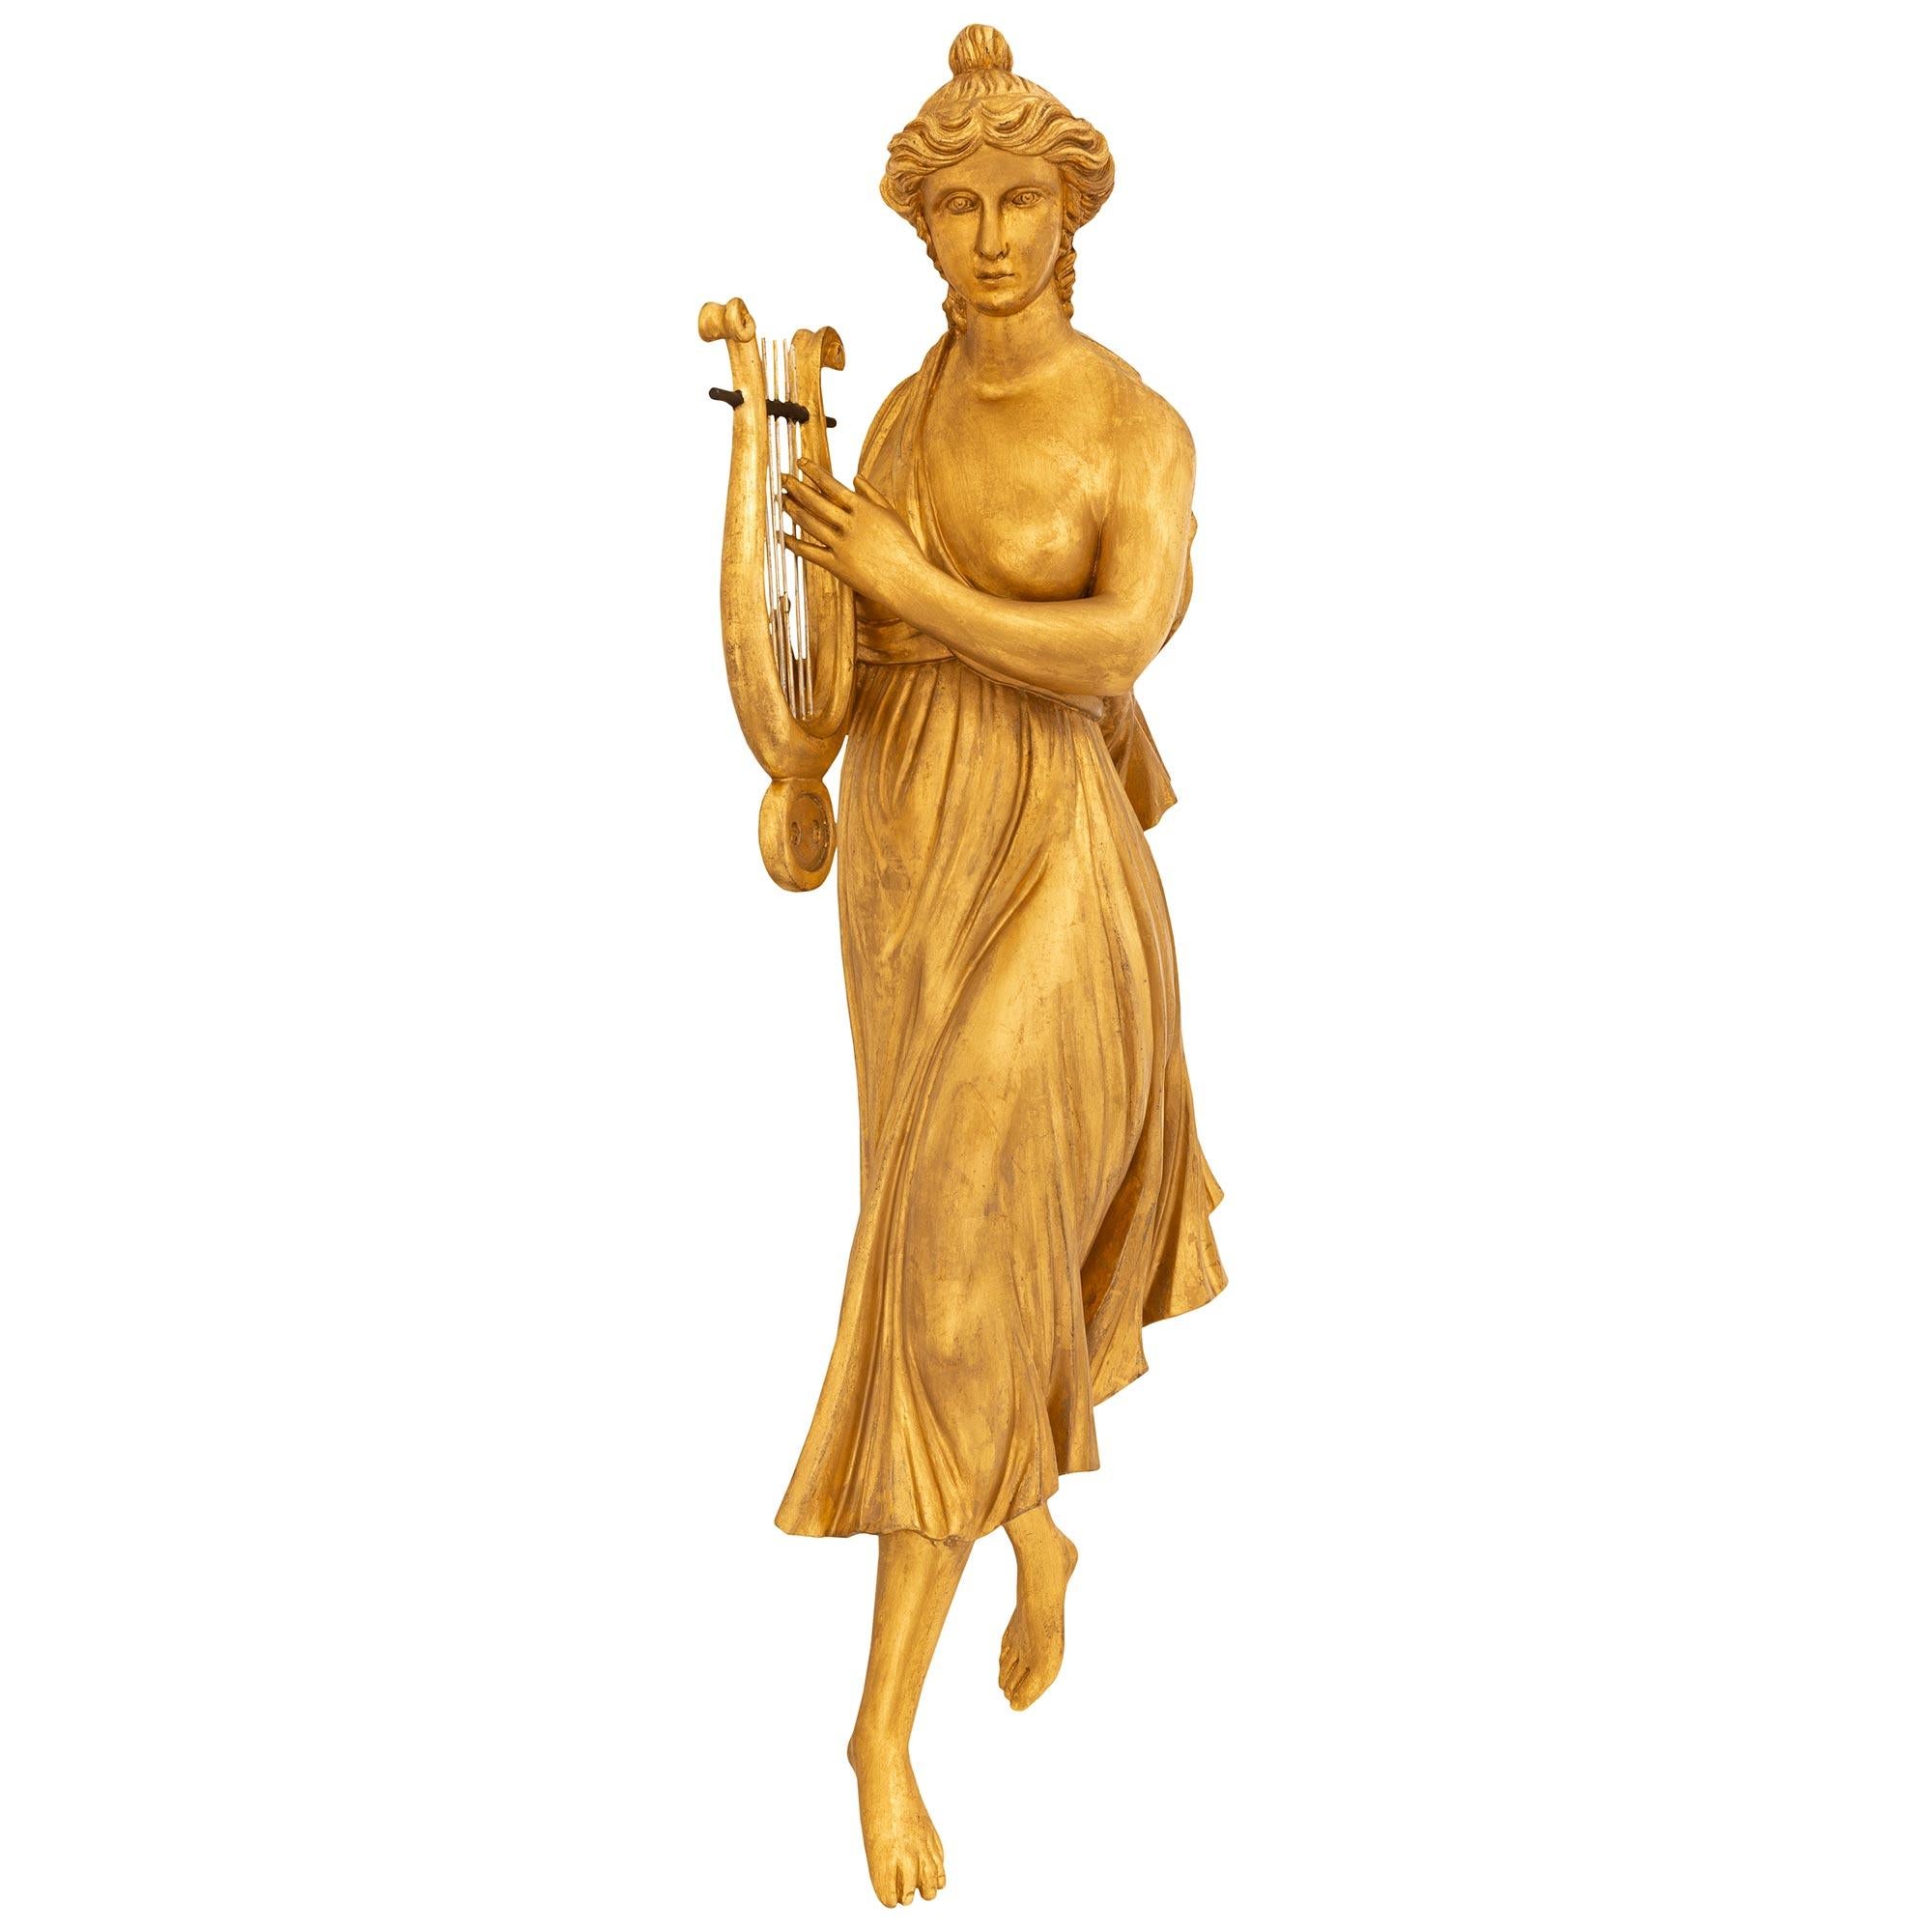 A very decorative pair of Continental 19th century Louis XVI st. Giltwood wall decor. Each of the richly carved maidens is wearing classical attire, with their hair in an updo and holding their musical instruments in both hands. The maiden to the